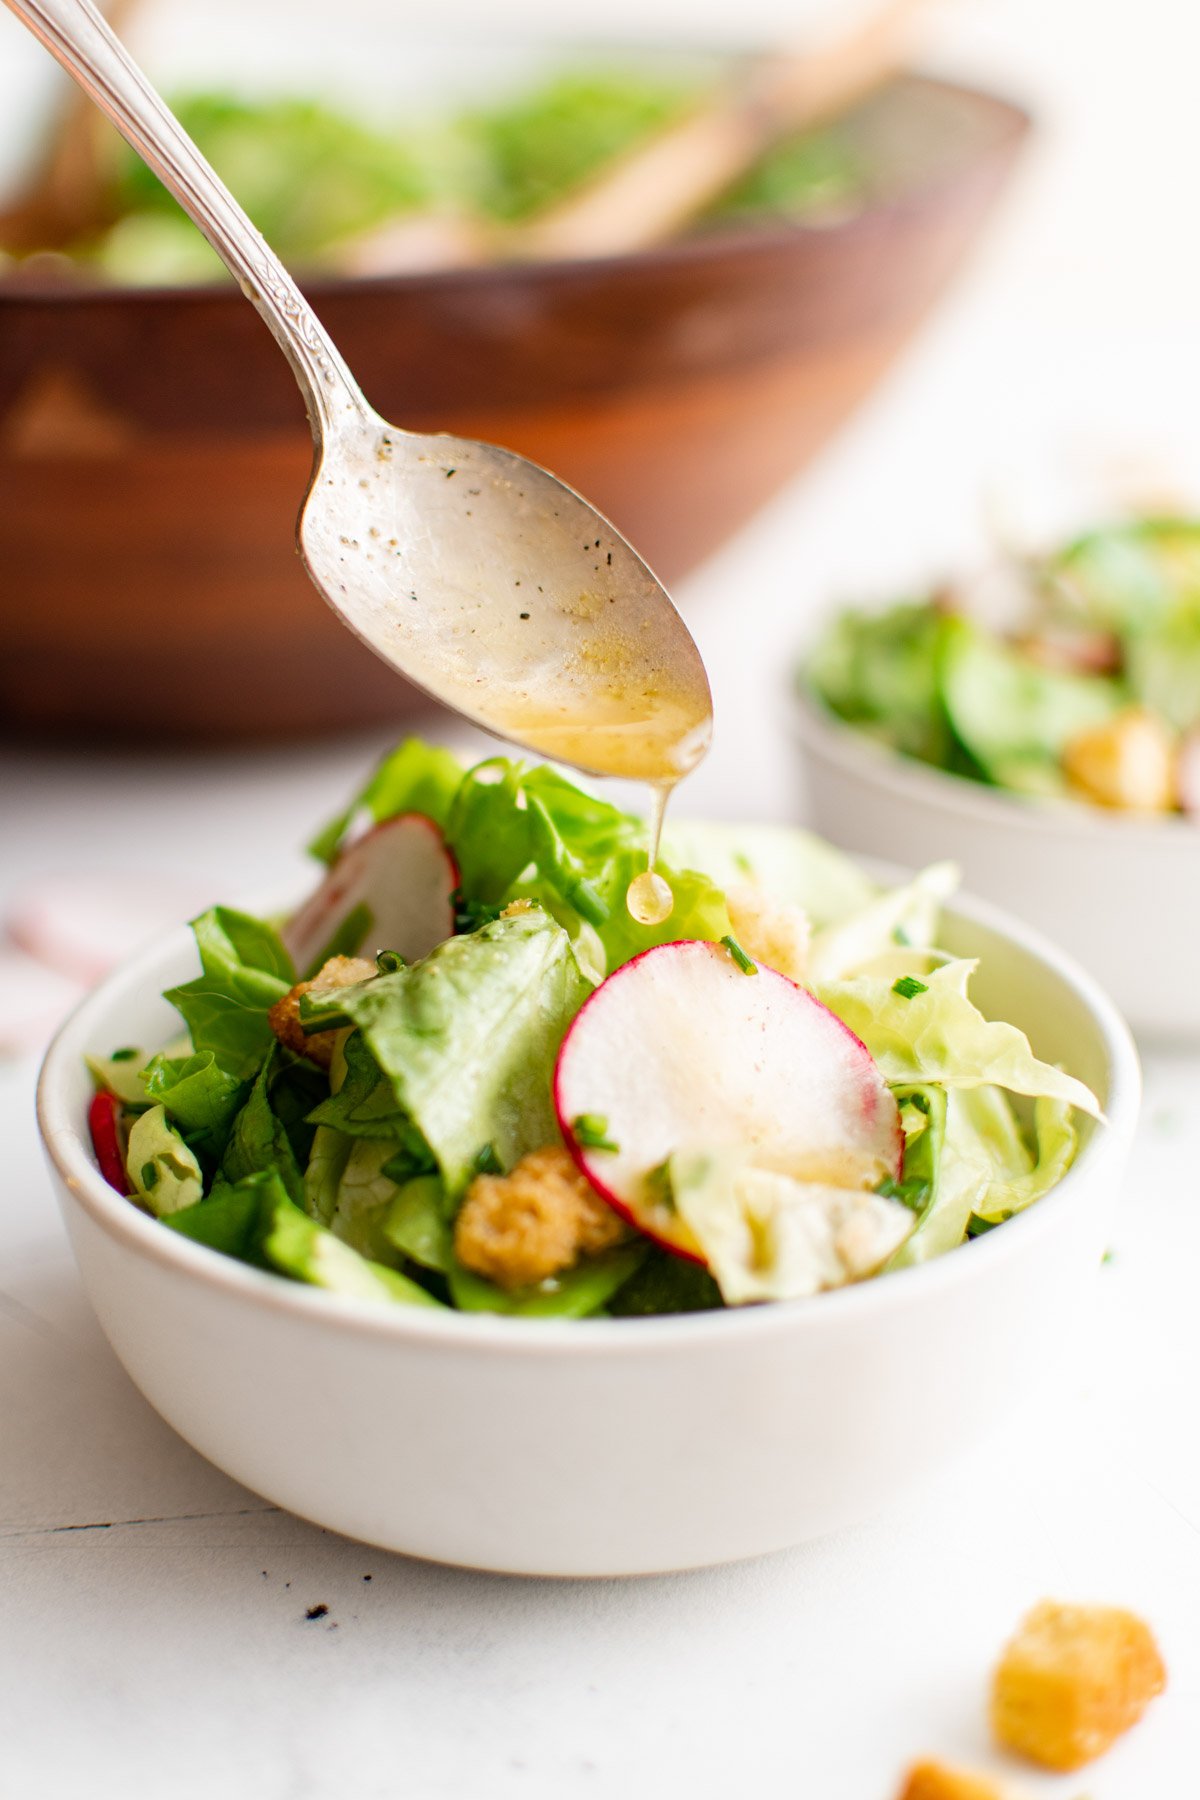 Butter lettuce salad in a white and a spoon with dressing.